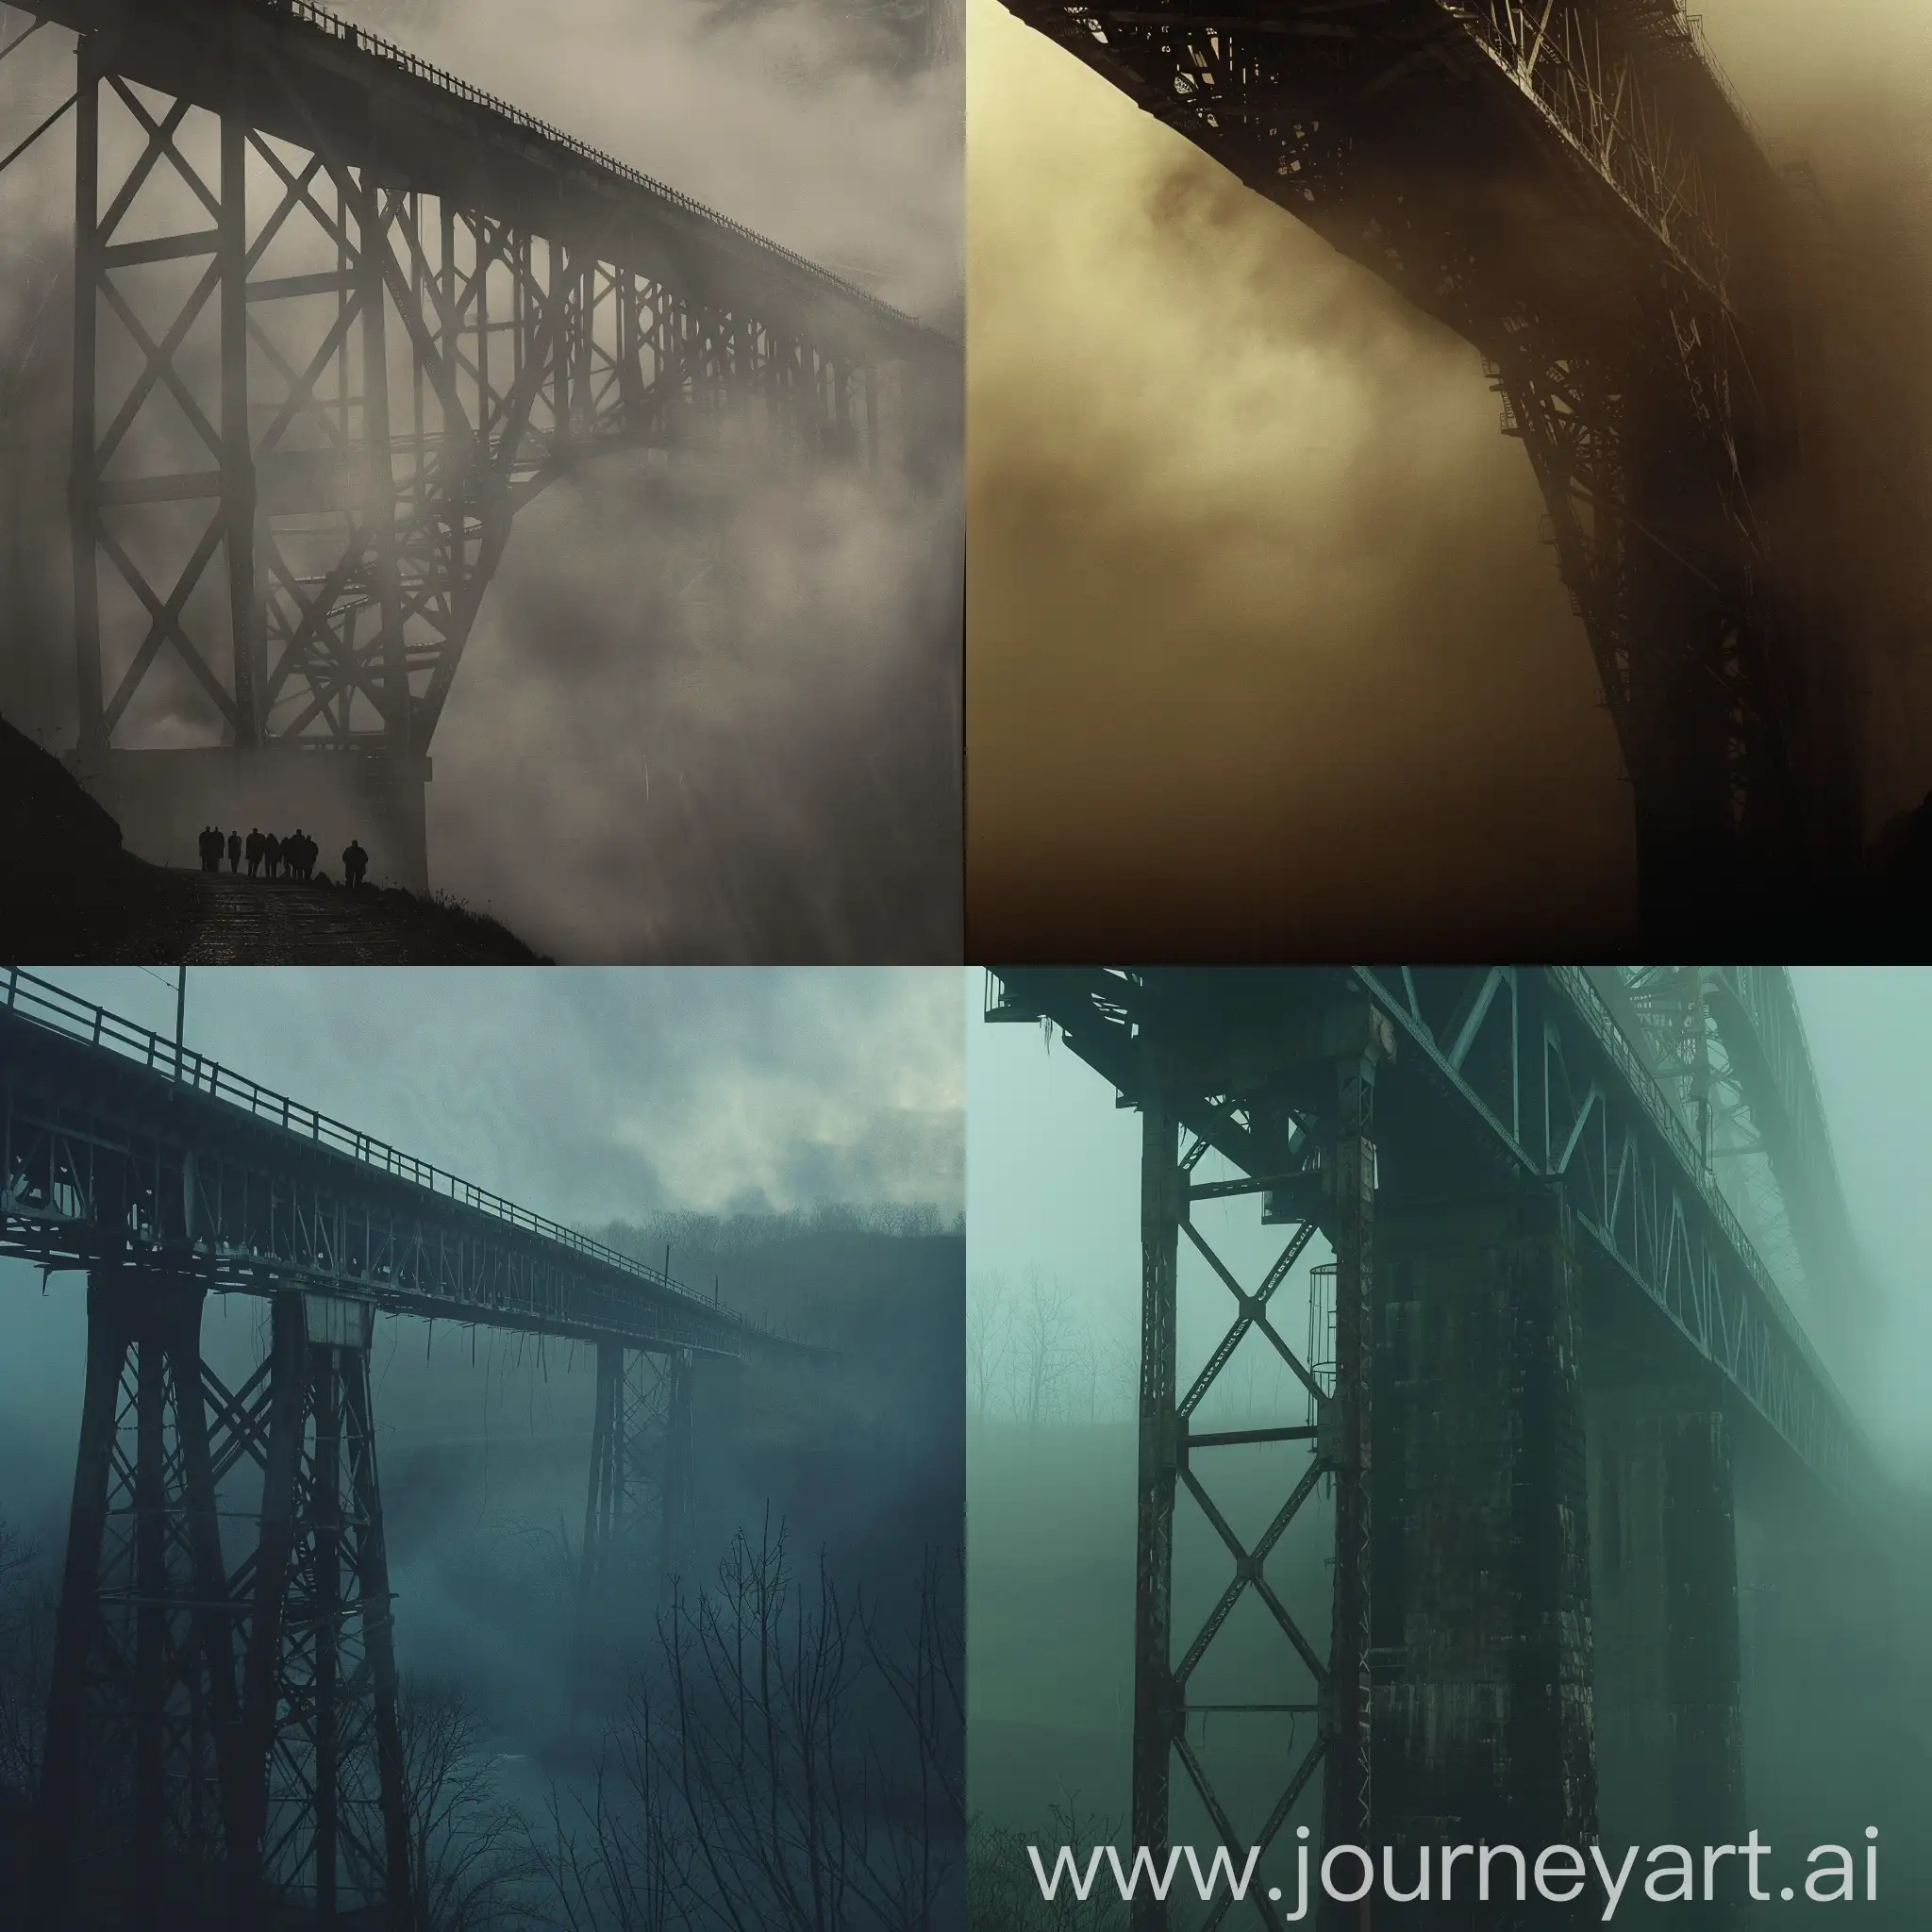 an image of a giant bridge in the mist, great depression, atlas shrugged inspired, eerie